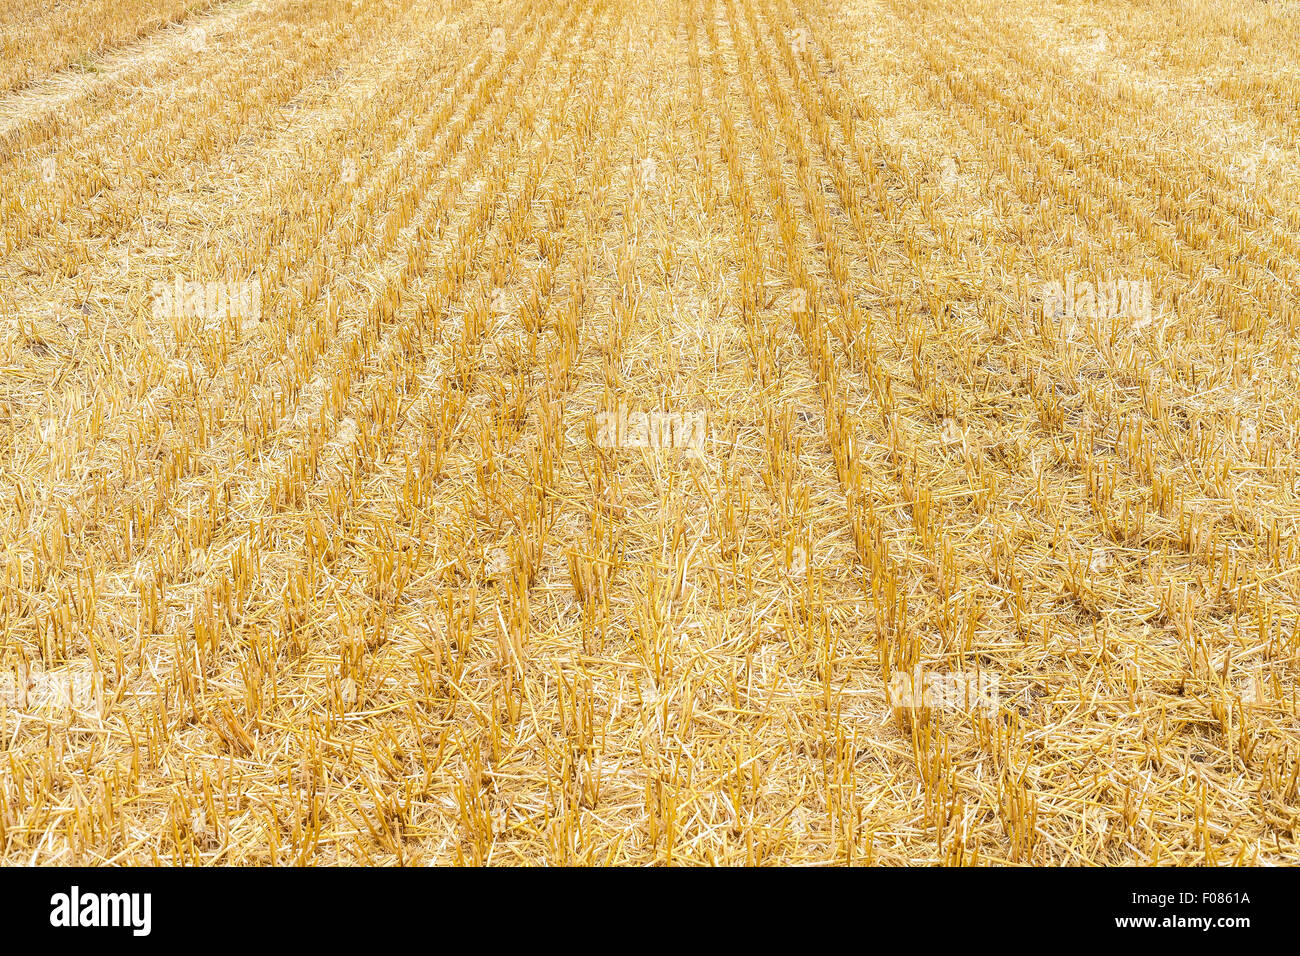 Field after harvest, dry straw background. Stock Photo